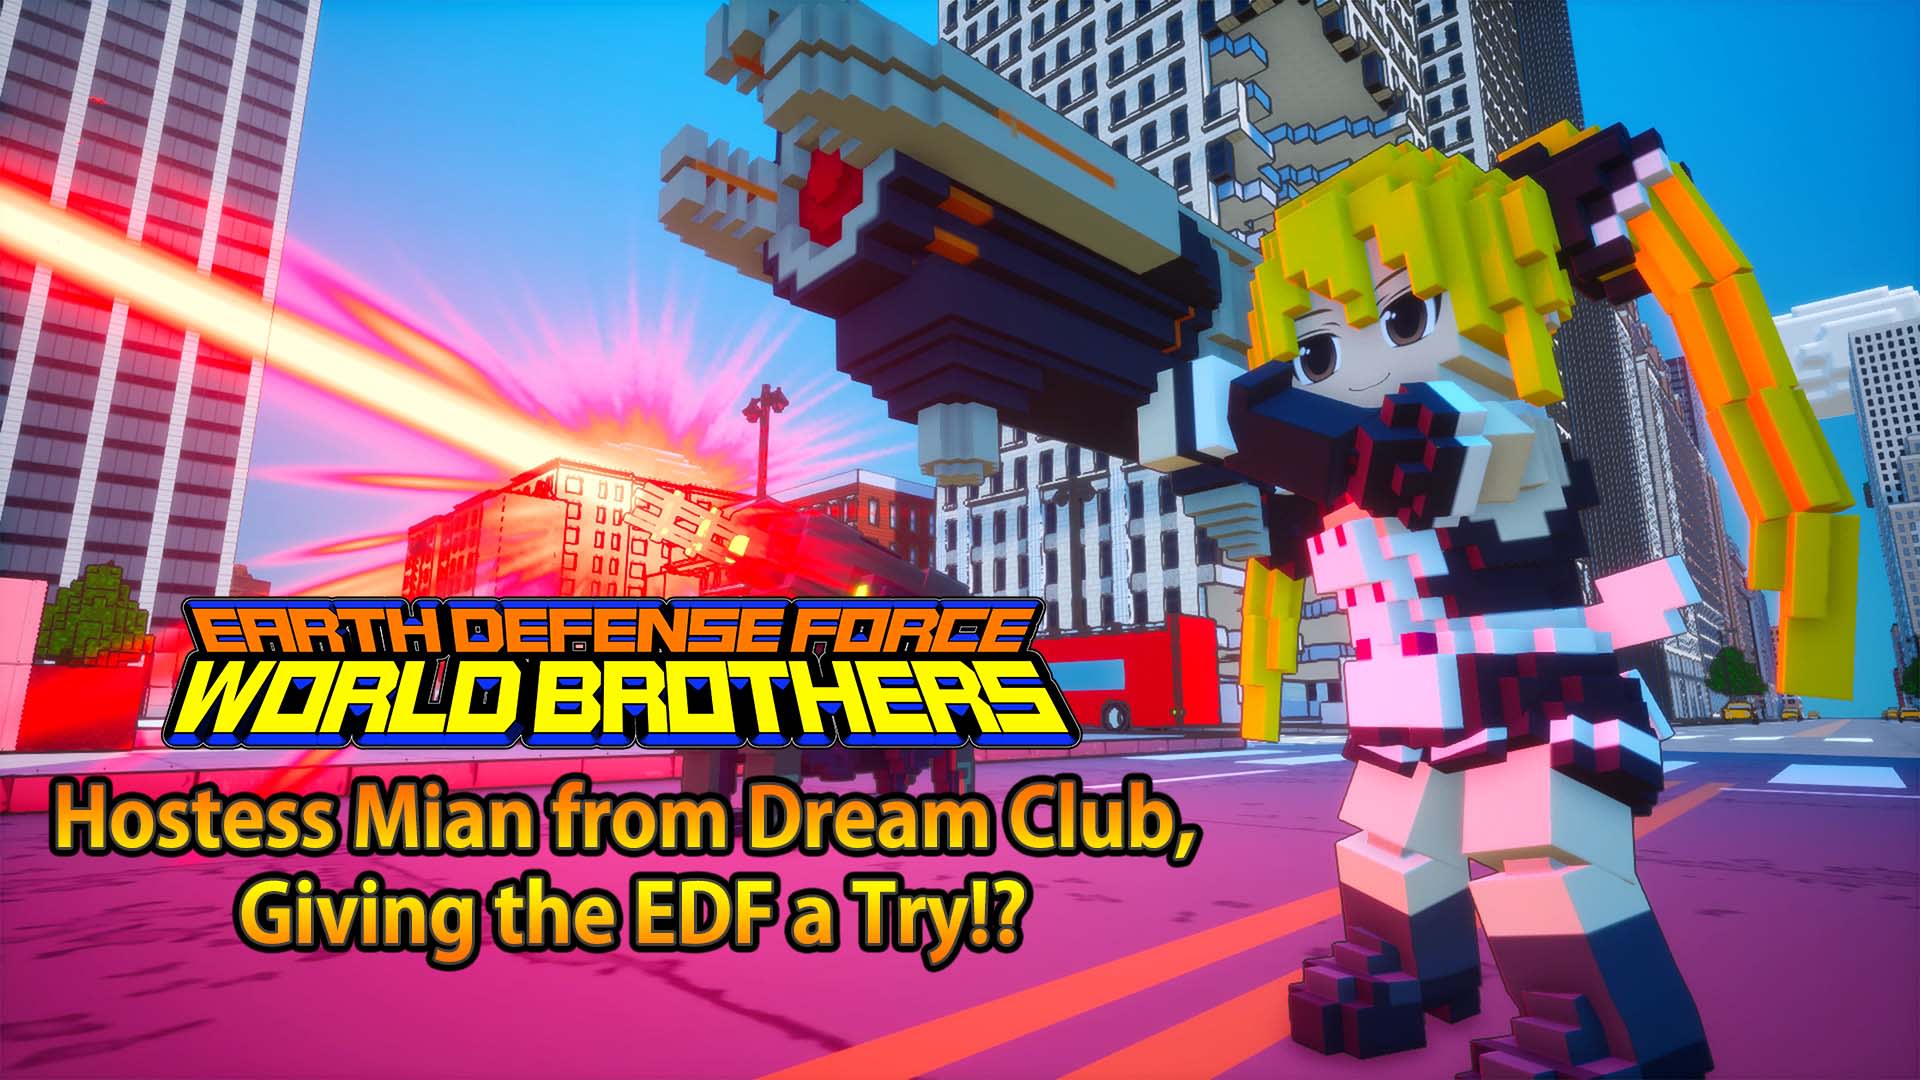 Hostess Mian from Dream Club, Giving the EDF a Try!?